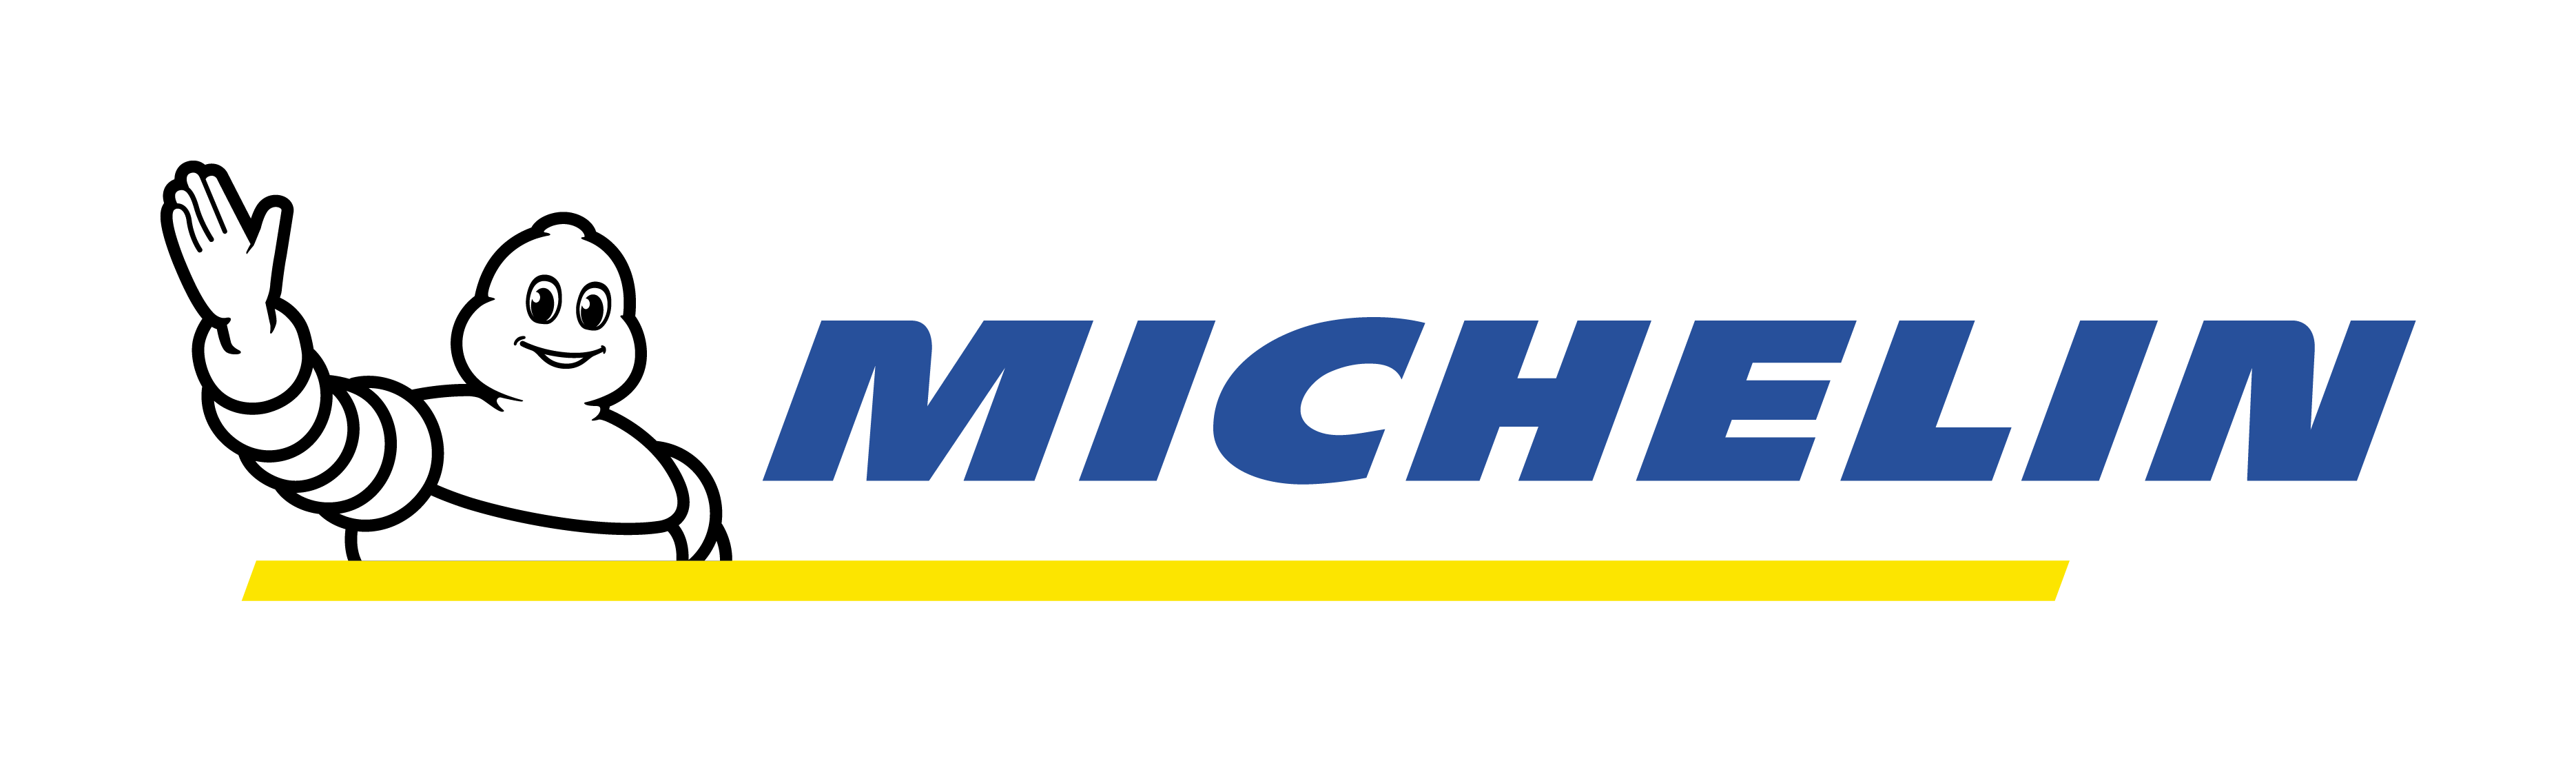 Tyres From Michelin Hdpng.com  - Michelin, Transparent background PNG HD thumbnail